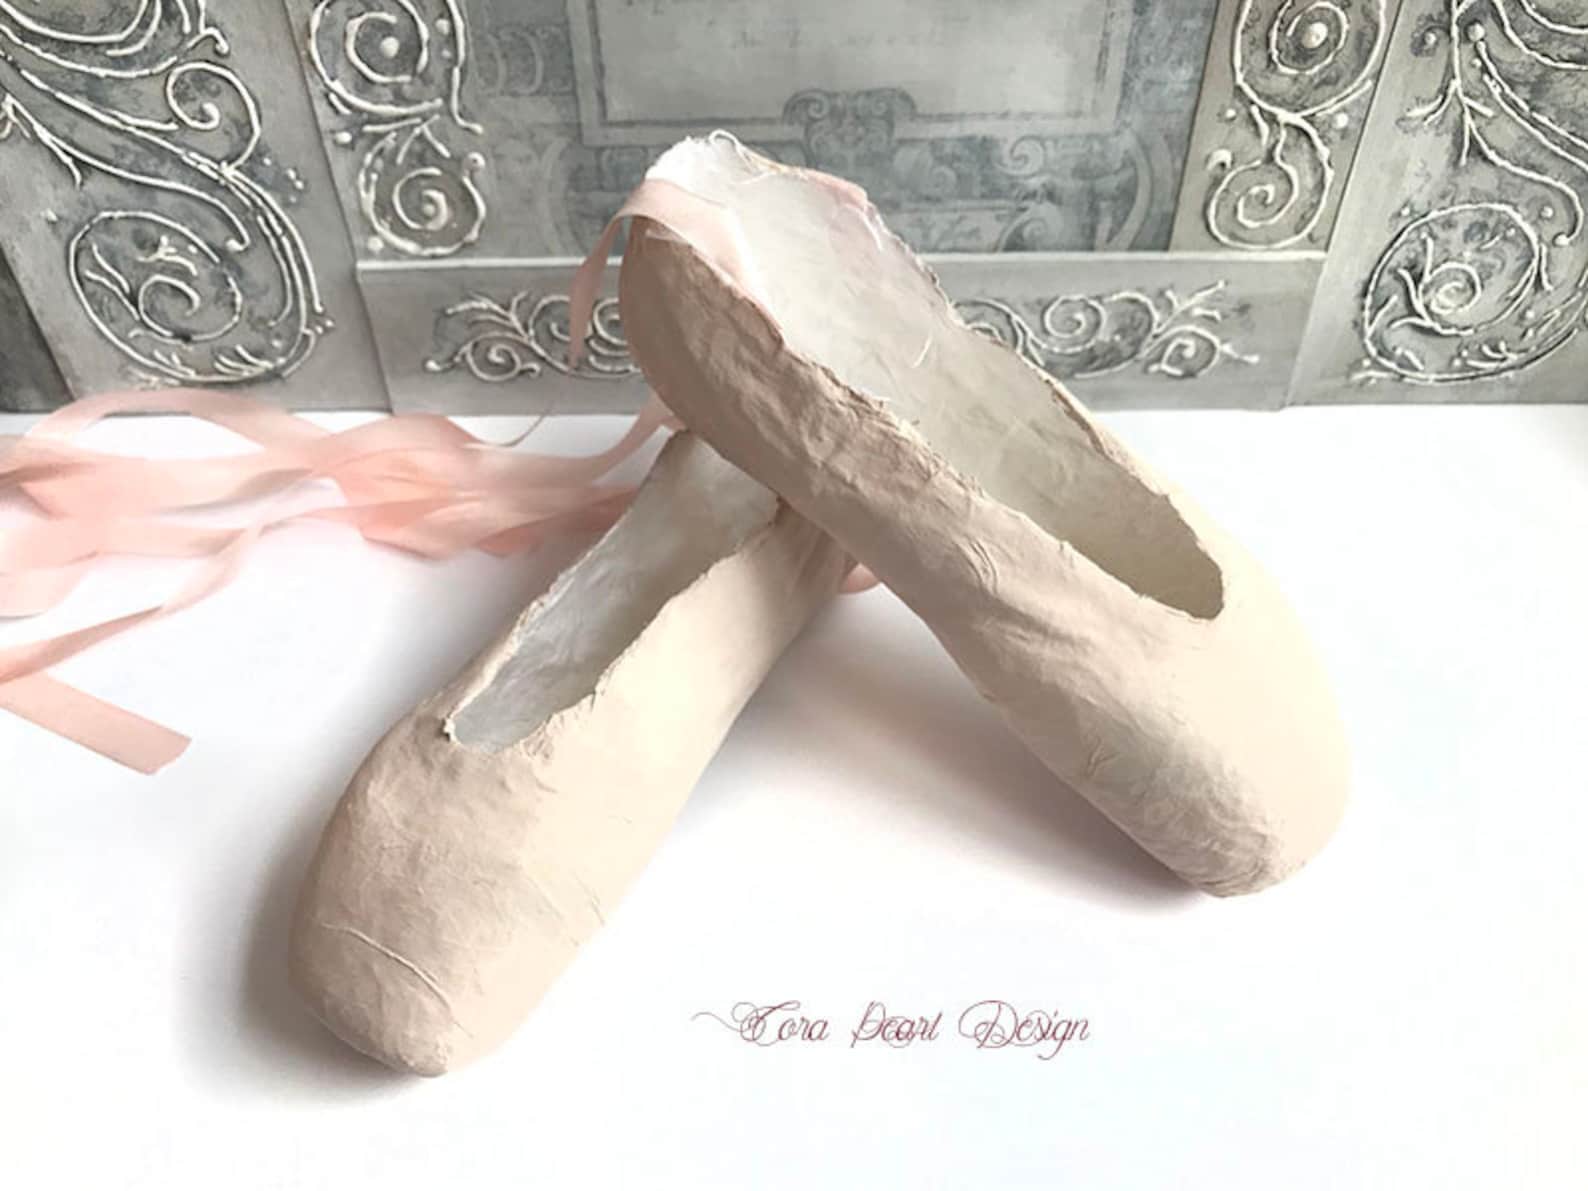 pale pink paper pointe shoes - pink paper ballet shoes - shoe ornament - ballet gift - ballet shoes - ballerina gifts - paper ba